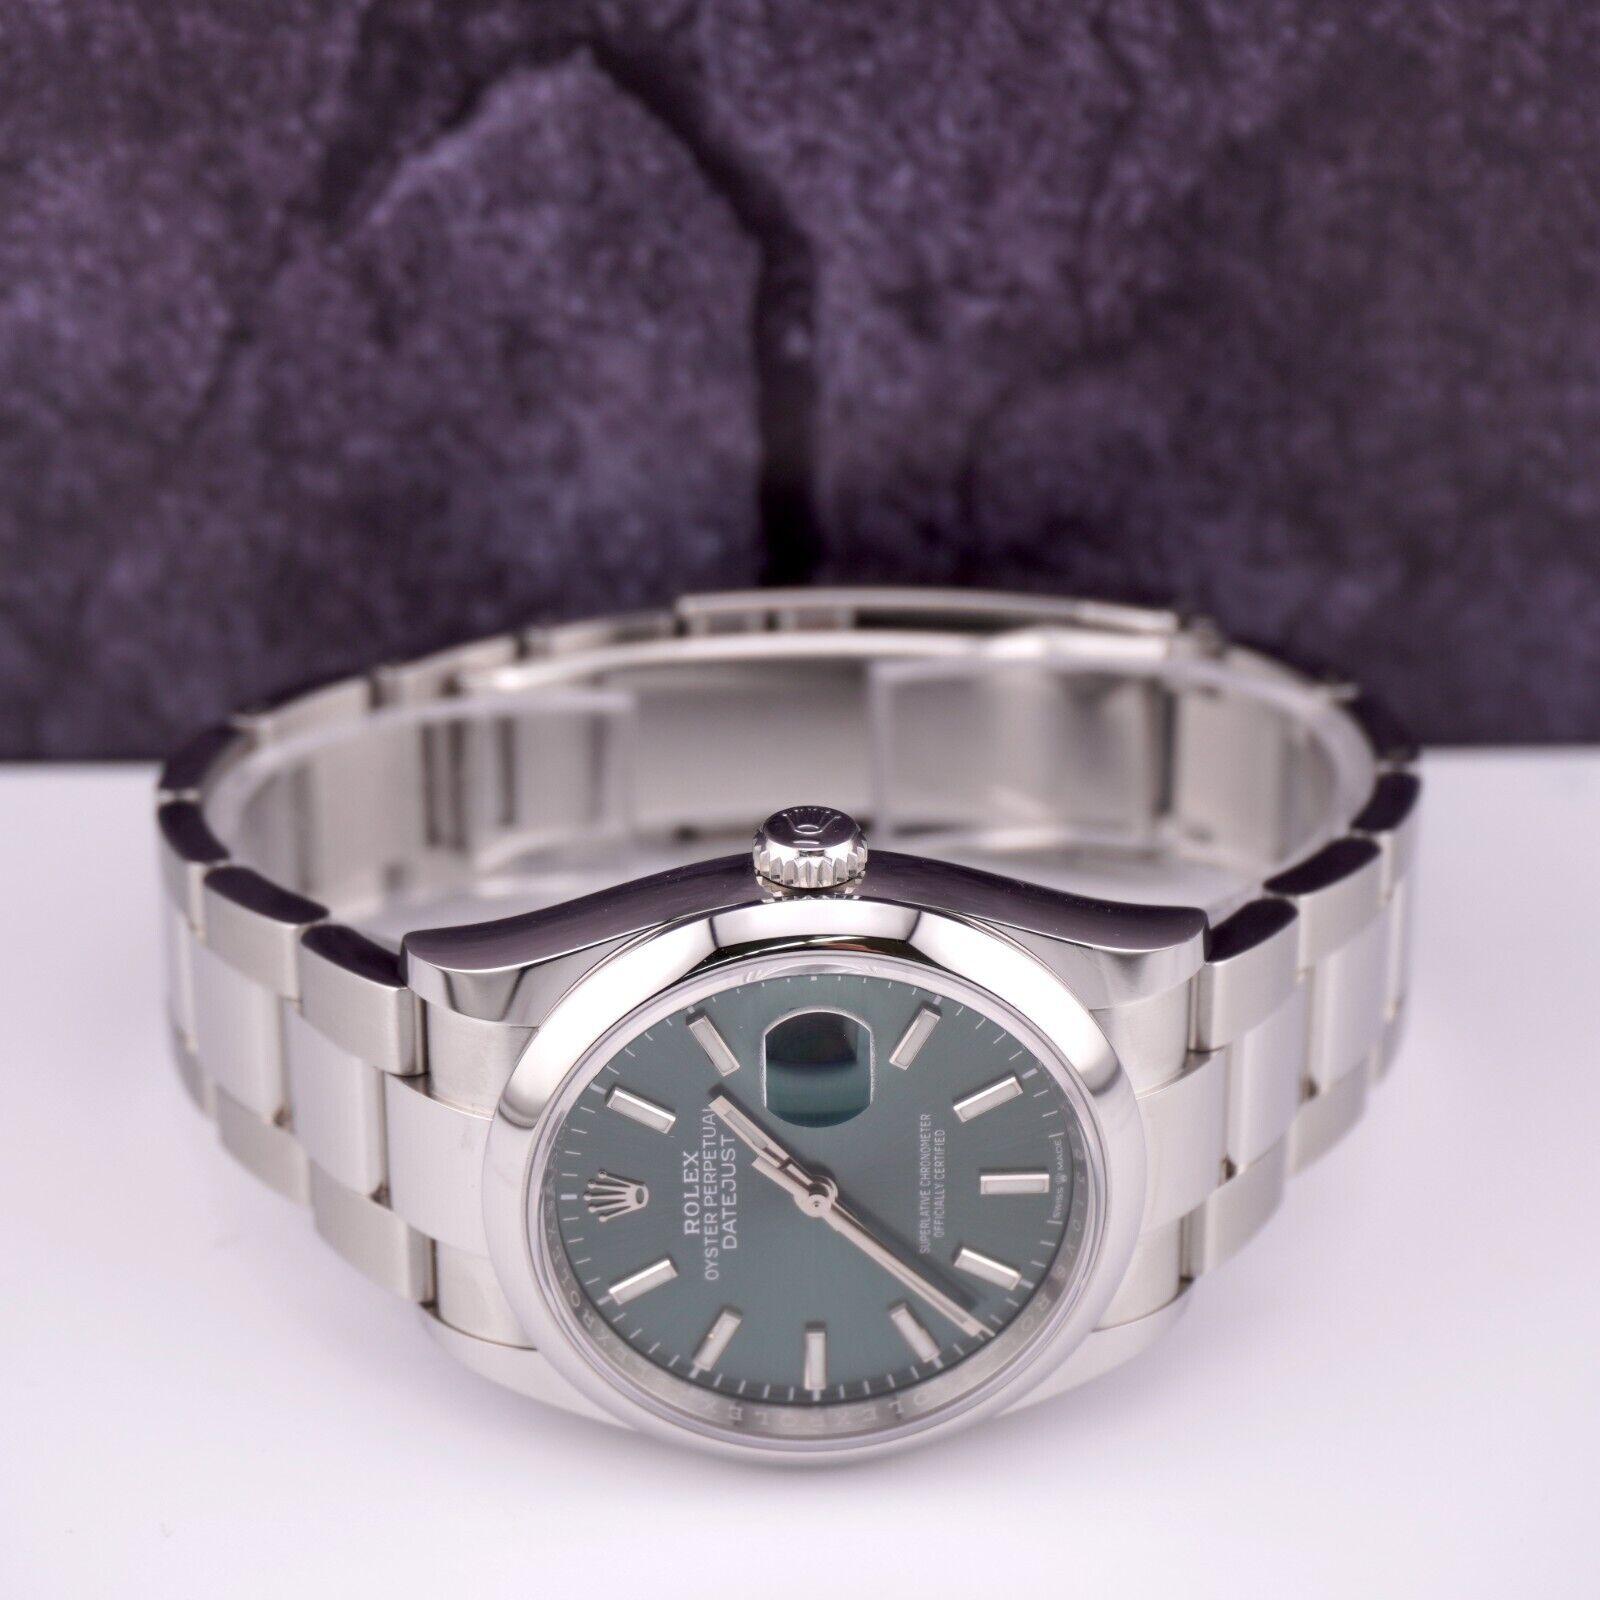 Modern Rolex Datejust 36mm Stainless Steel Green Dial Smooth Oyster Watch Ref: 126200 For Sale